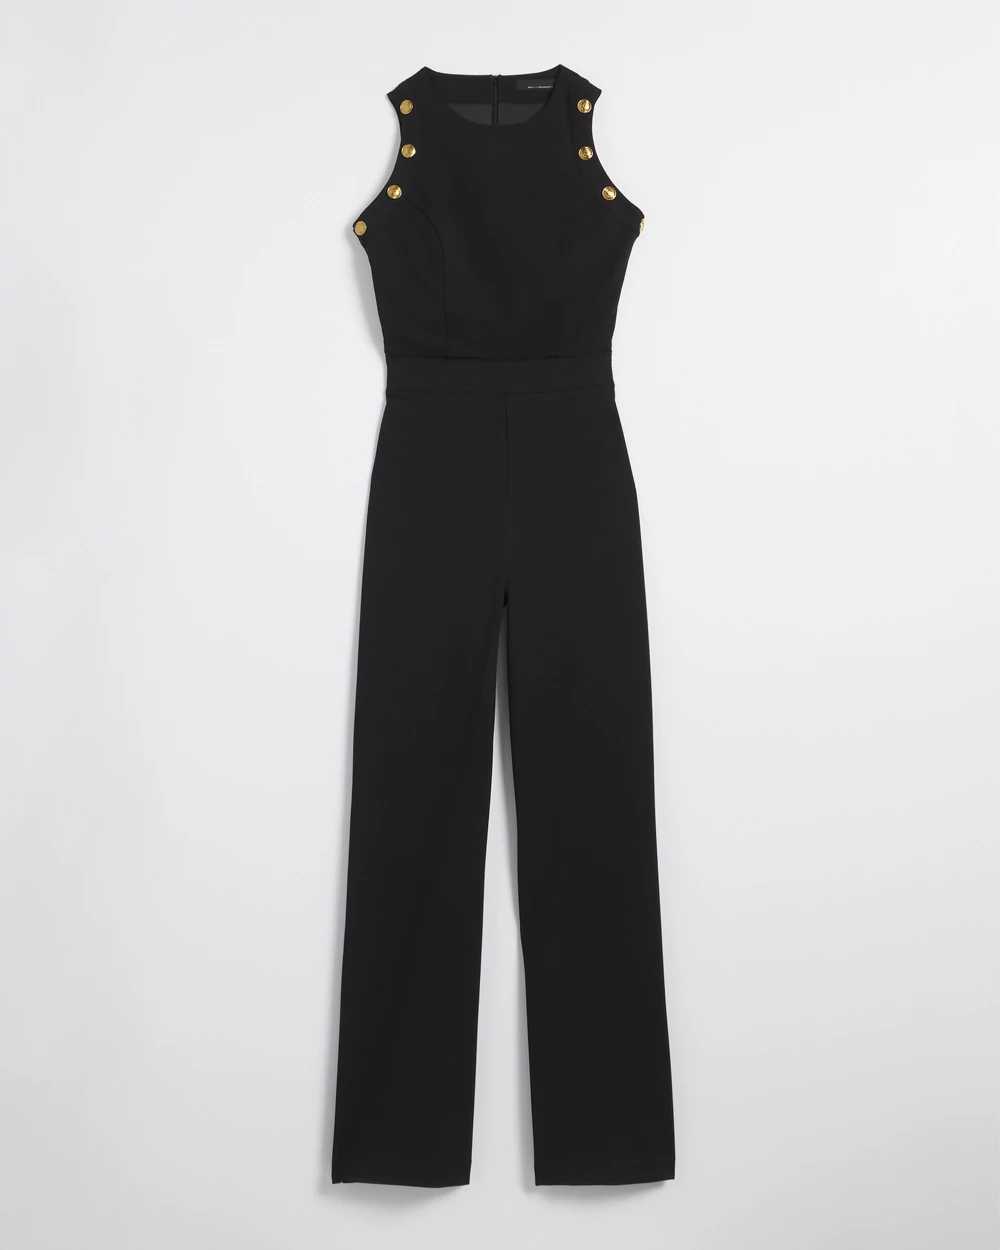 Petite Sleeveless Crest Jumpsuit click to view larger image.